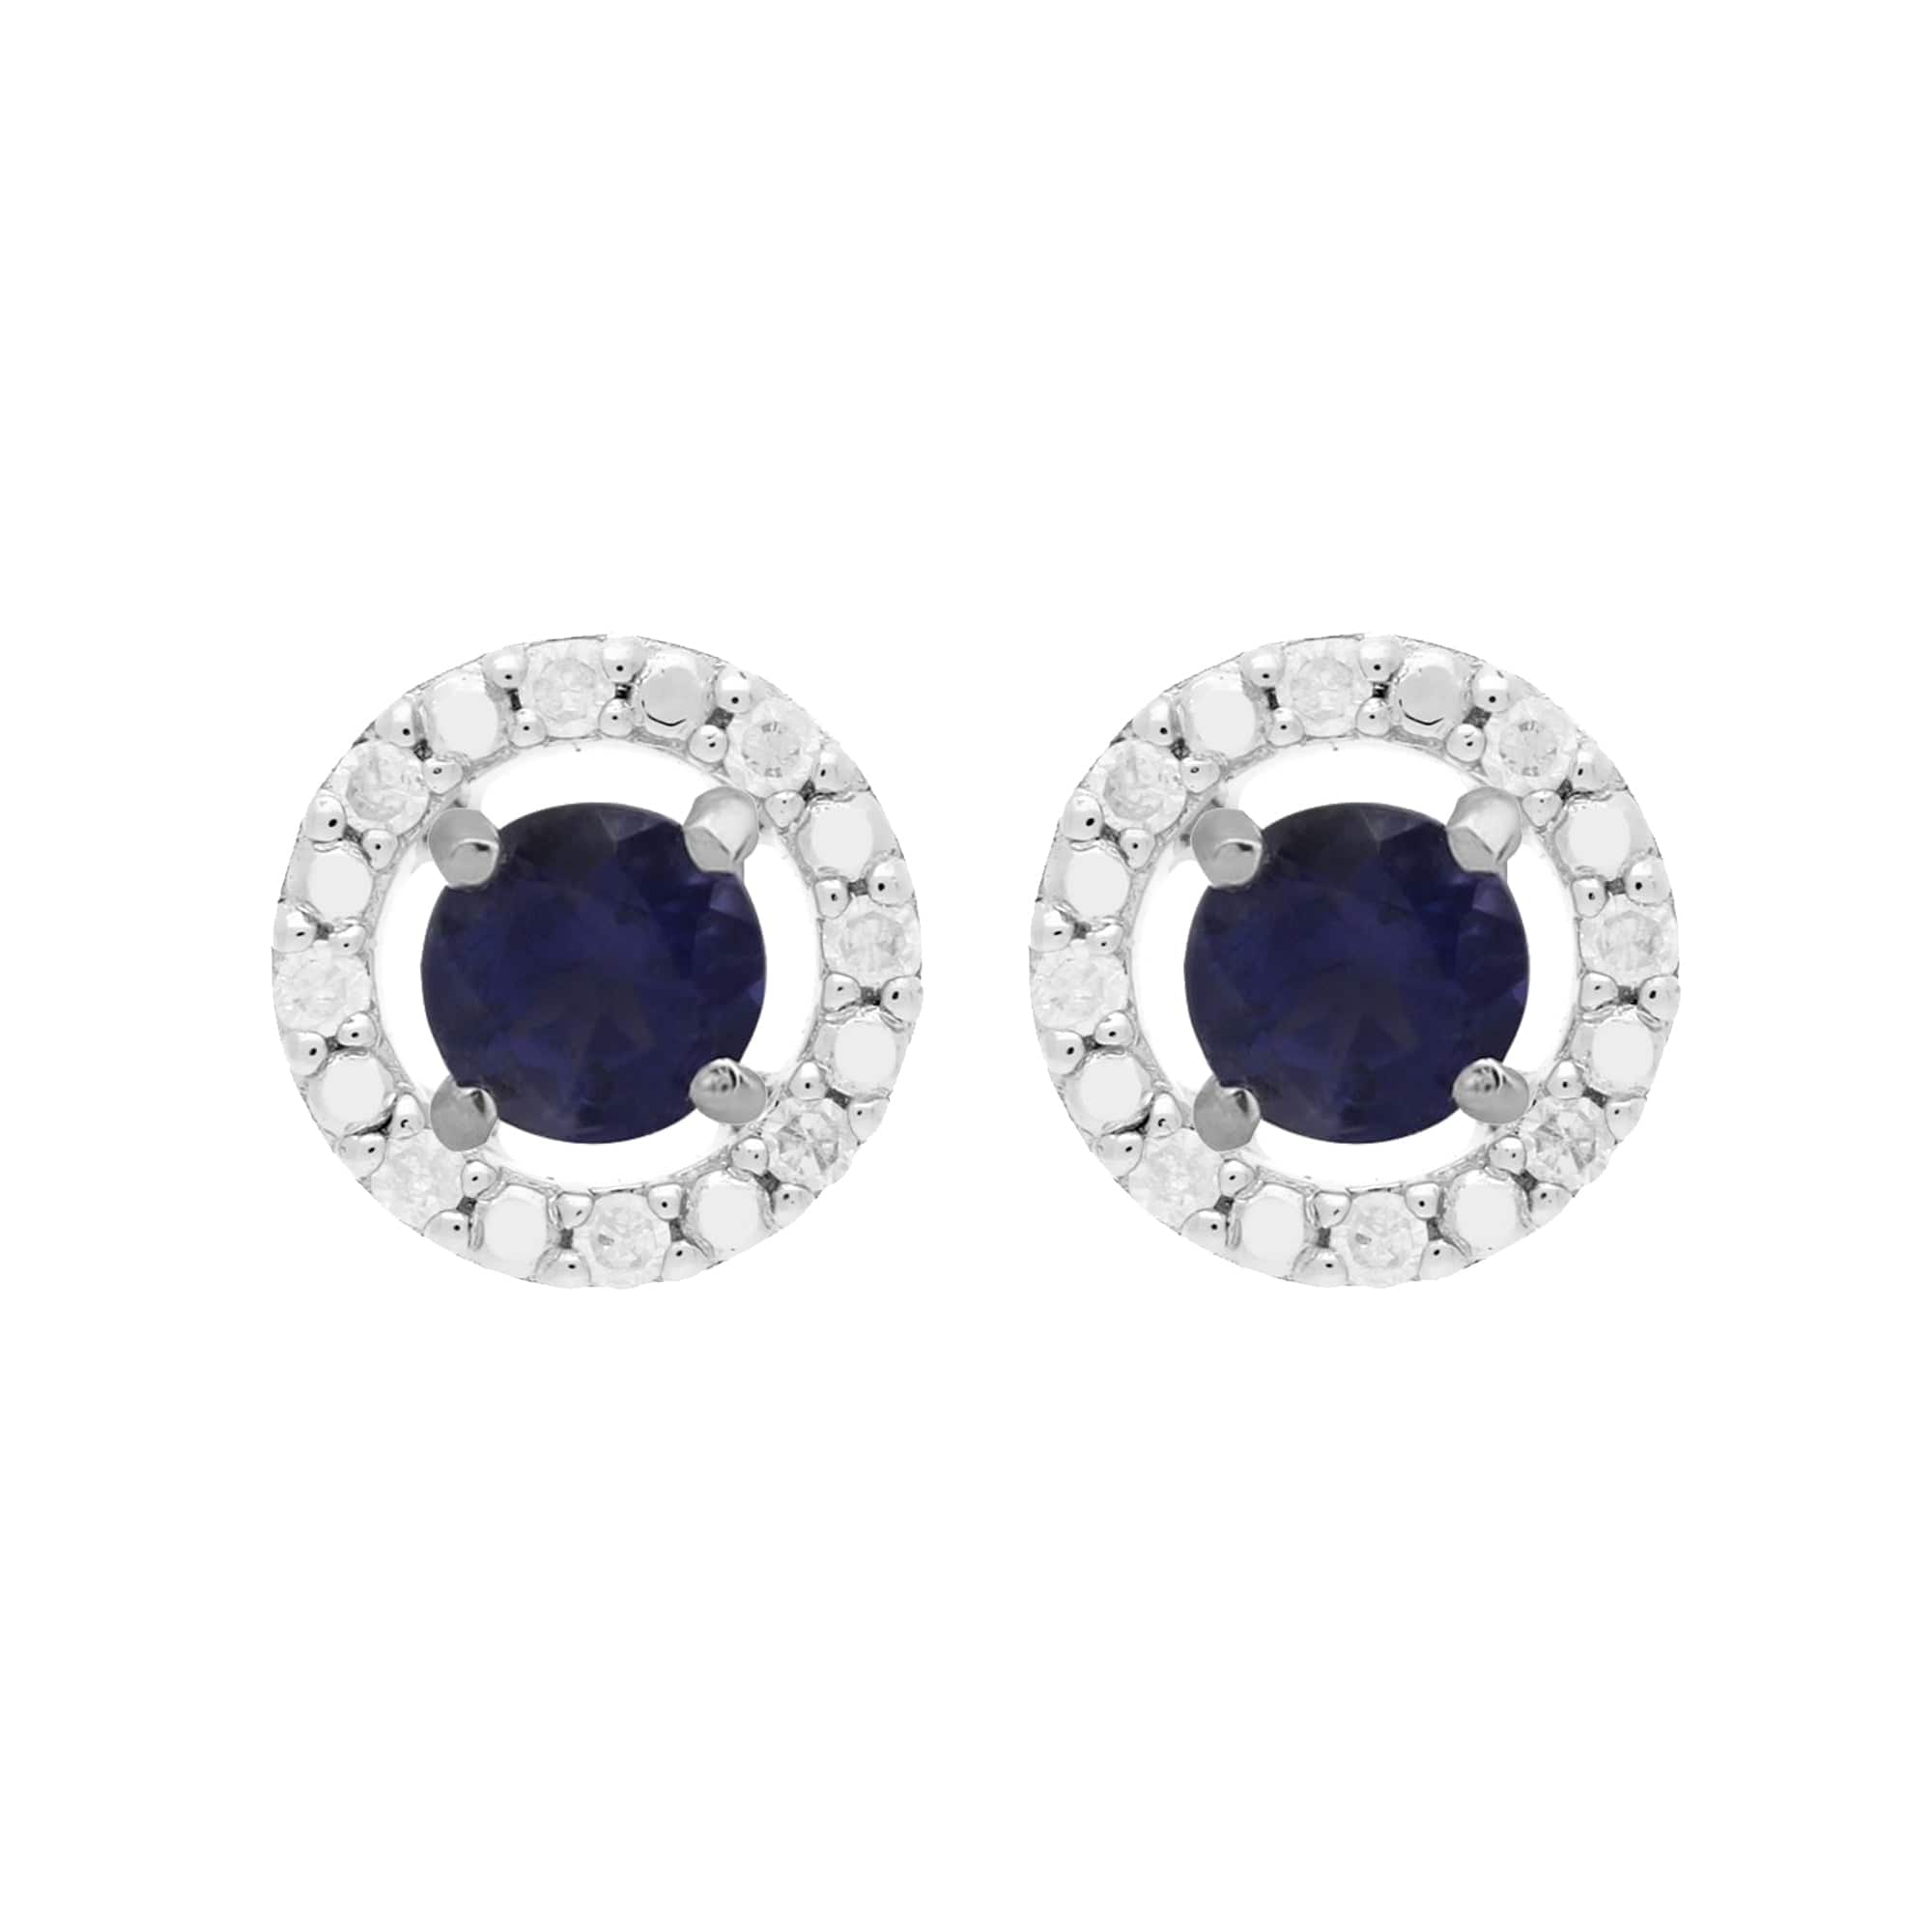 162E0071189-162E0228019 Classic Round Iolite Stud Earrings and Detachable Diamond Round Ear Jacket in 9ct White Gold 1